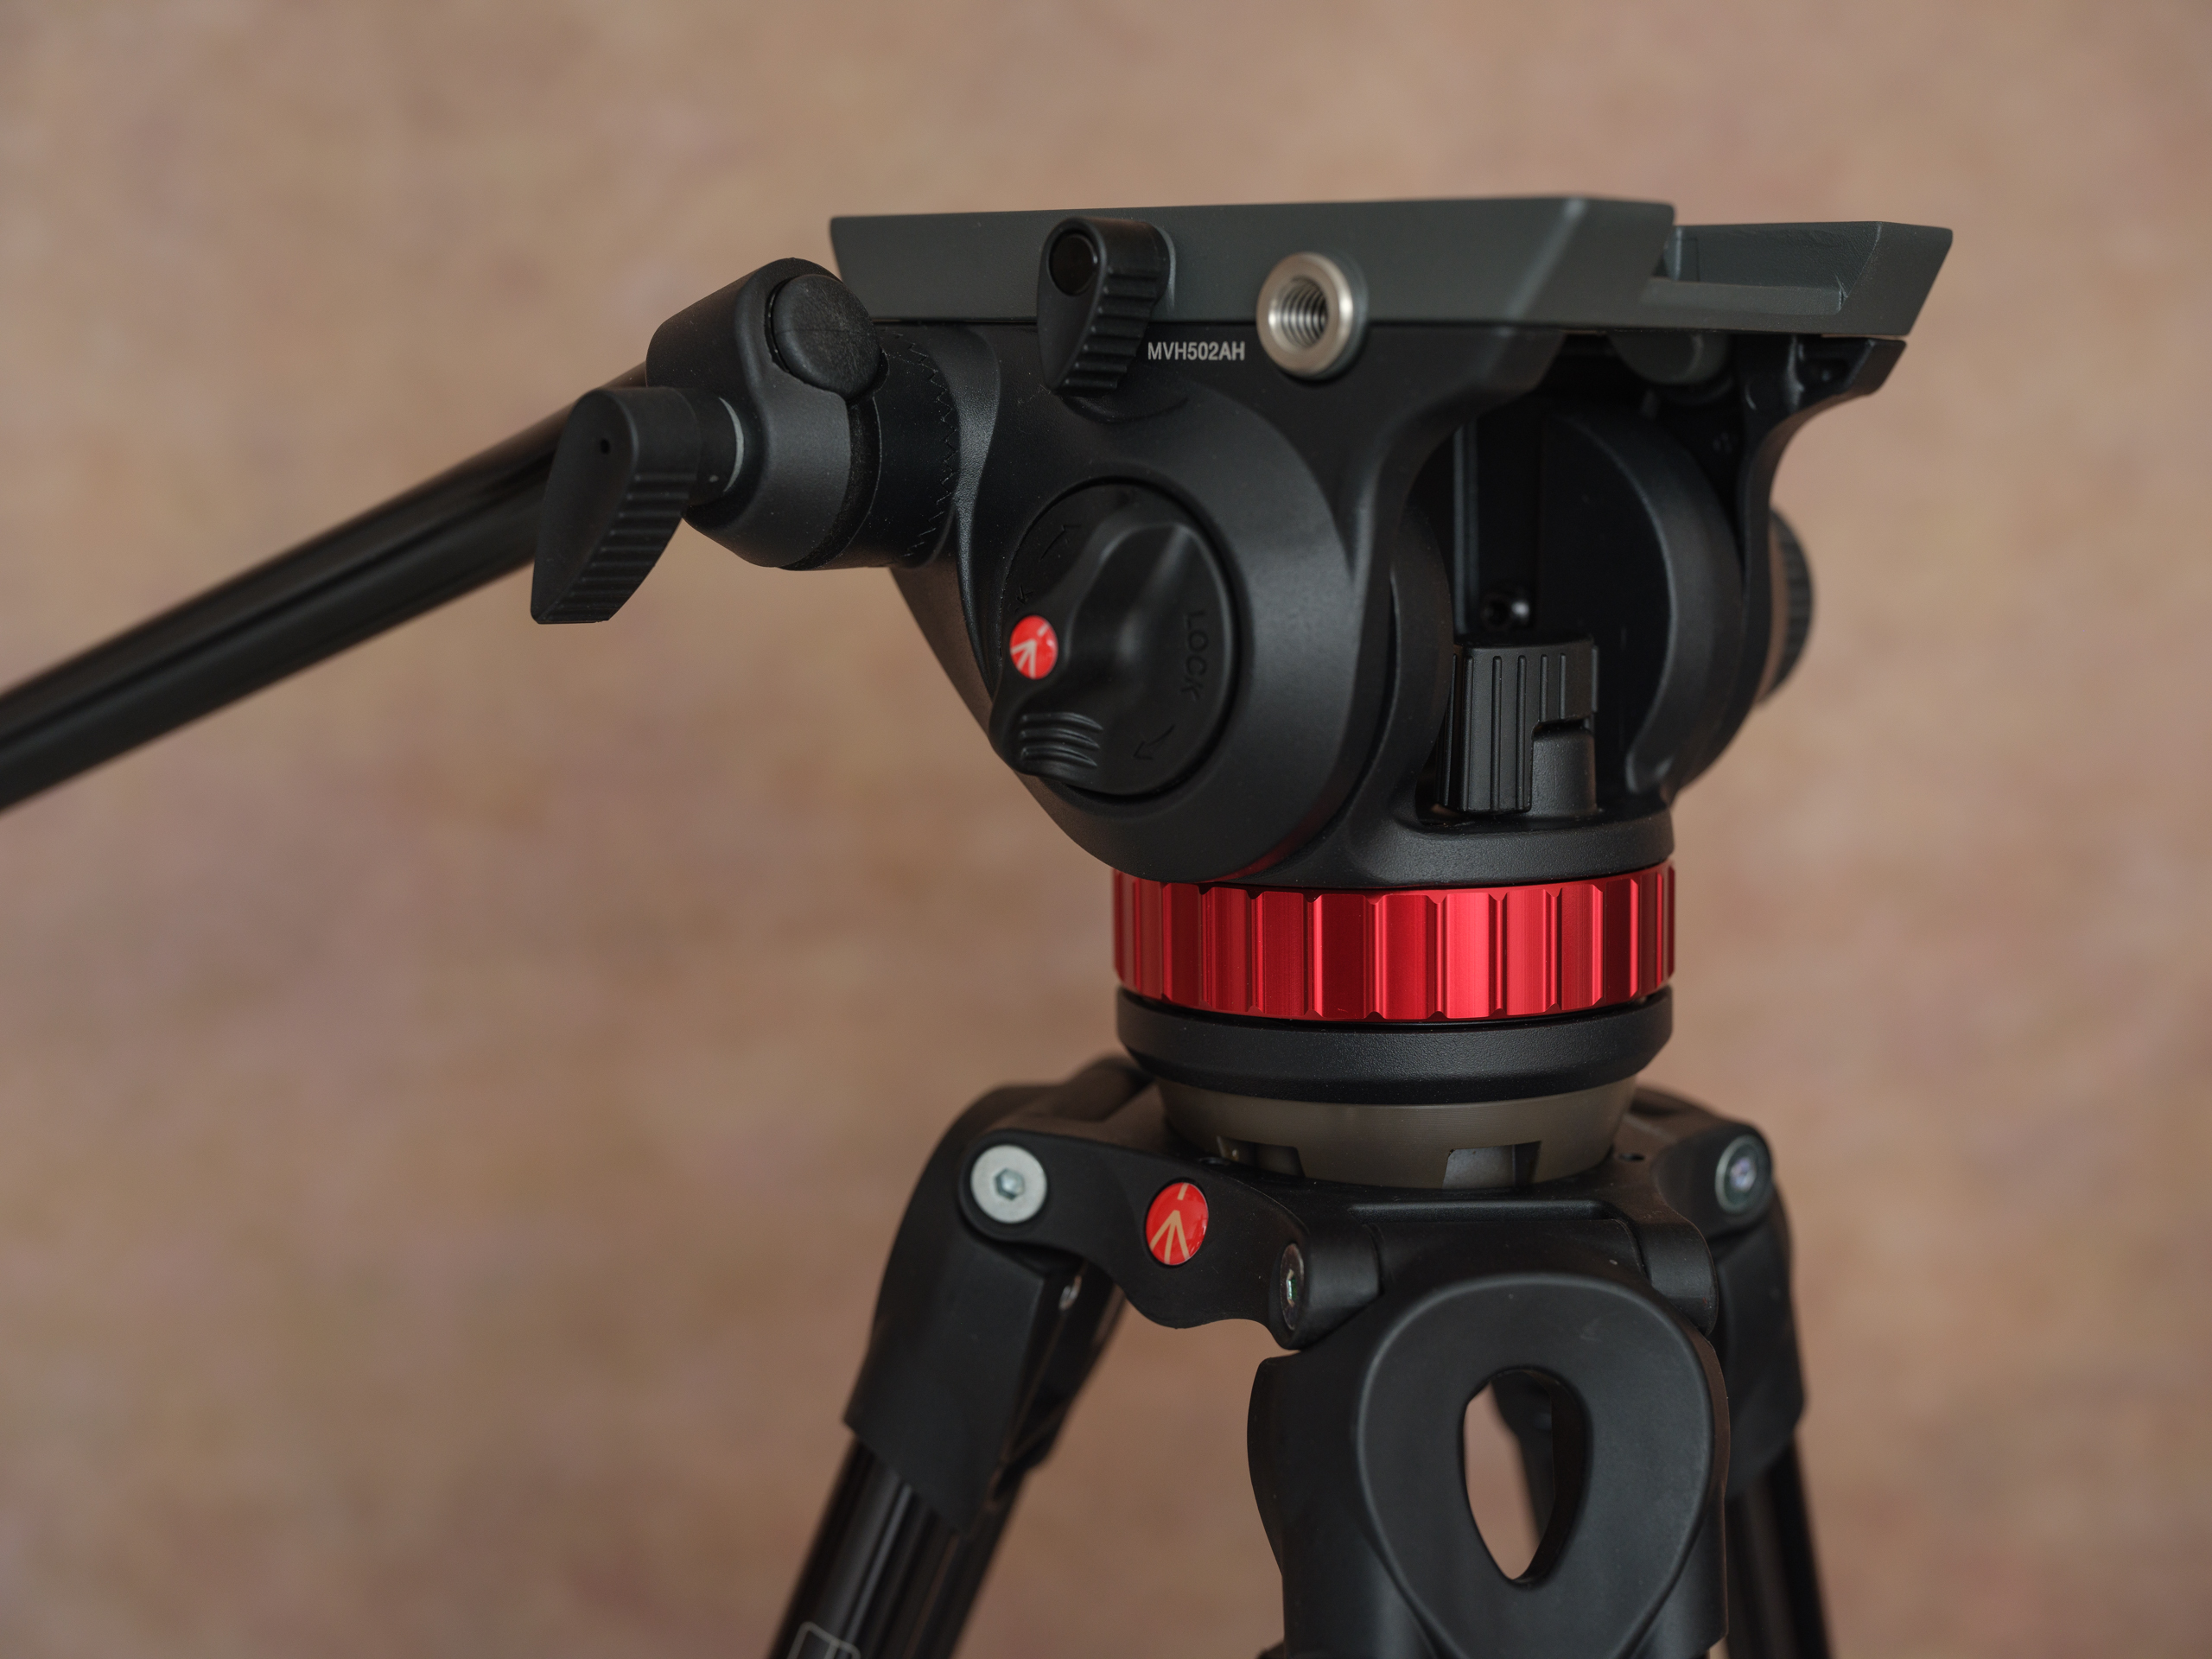 Manfrotto 502AM + 502AH